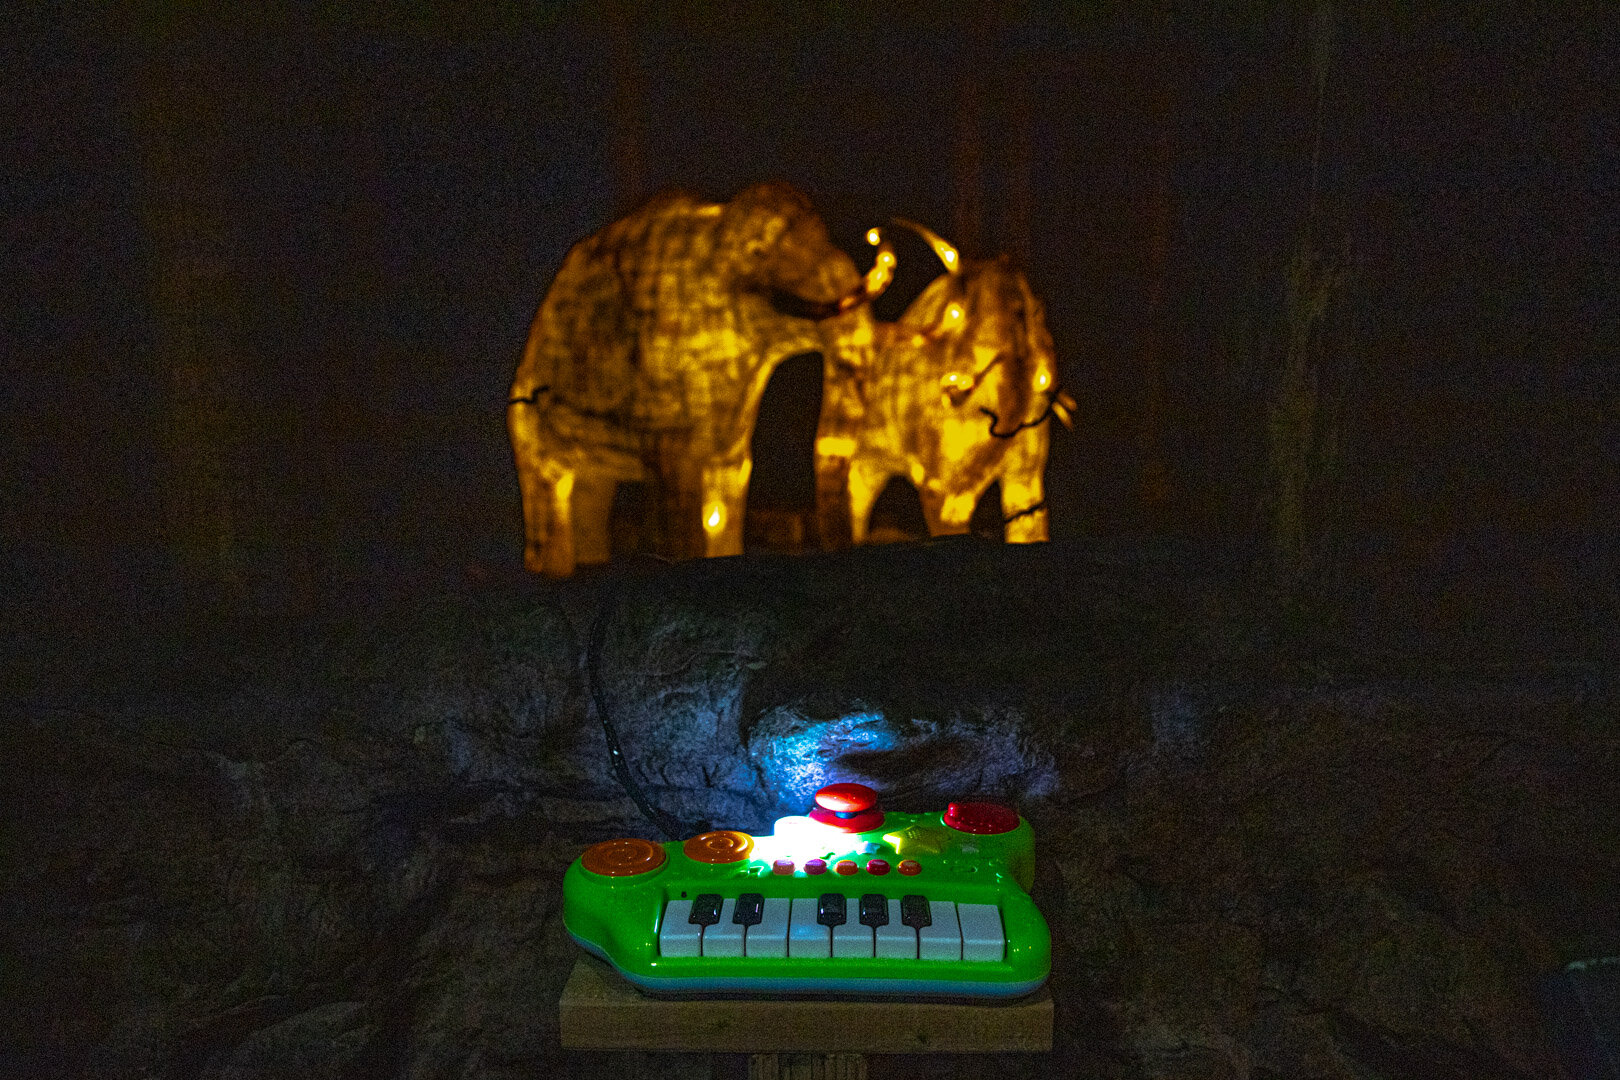  And there it was! A piano and what look to be two Woolly Mammoths that lite up.  